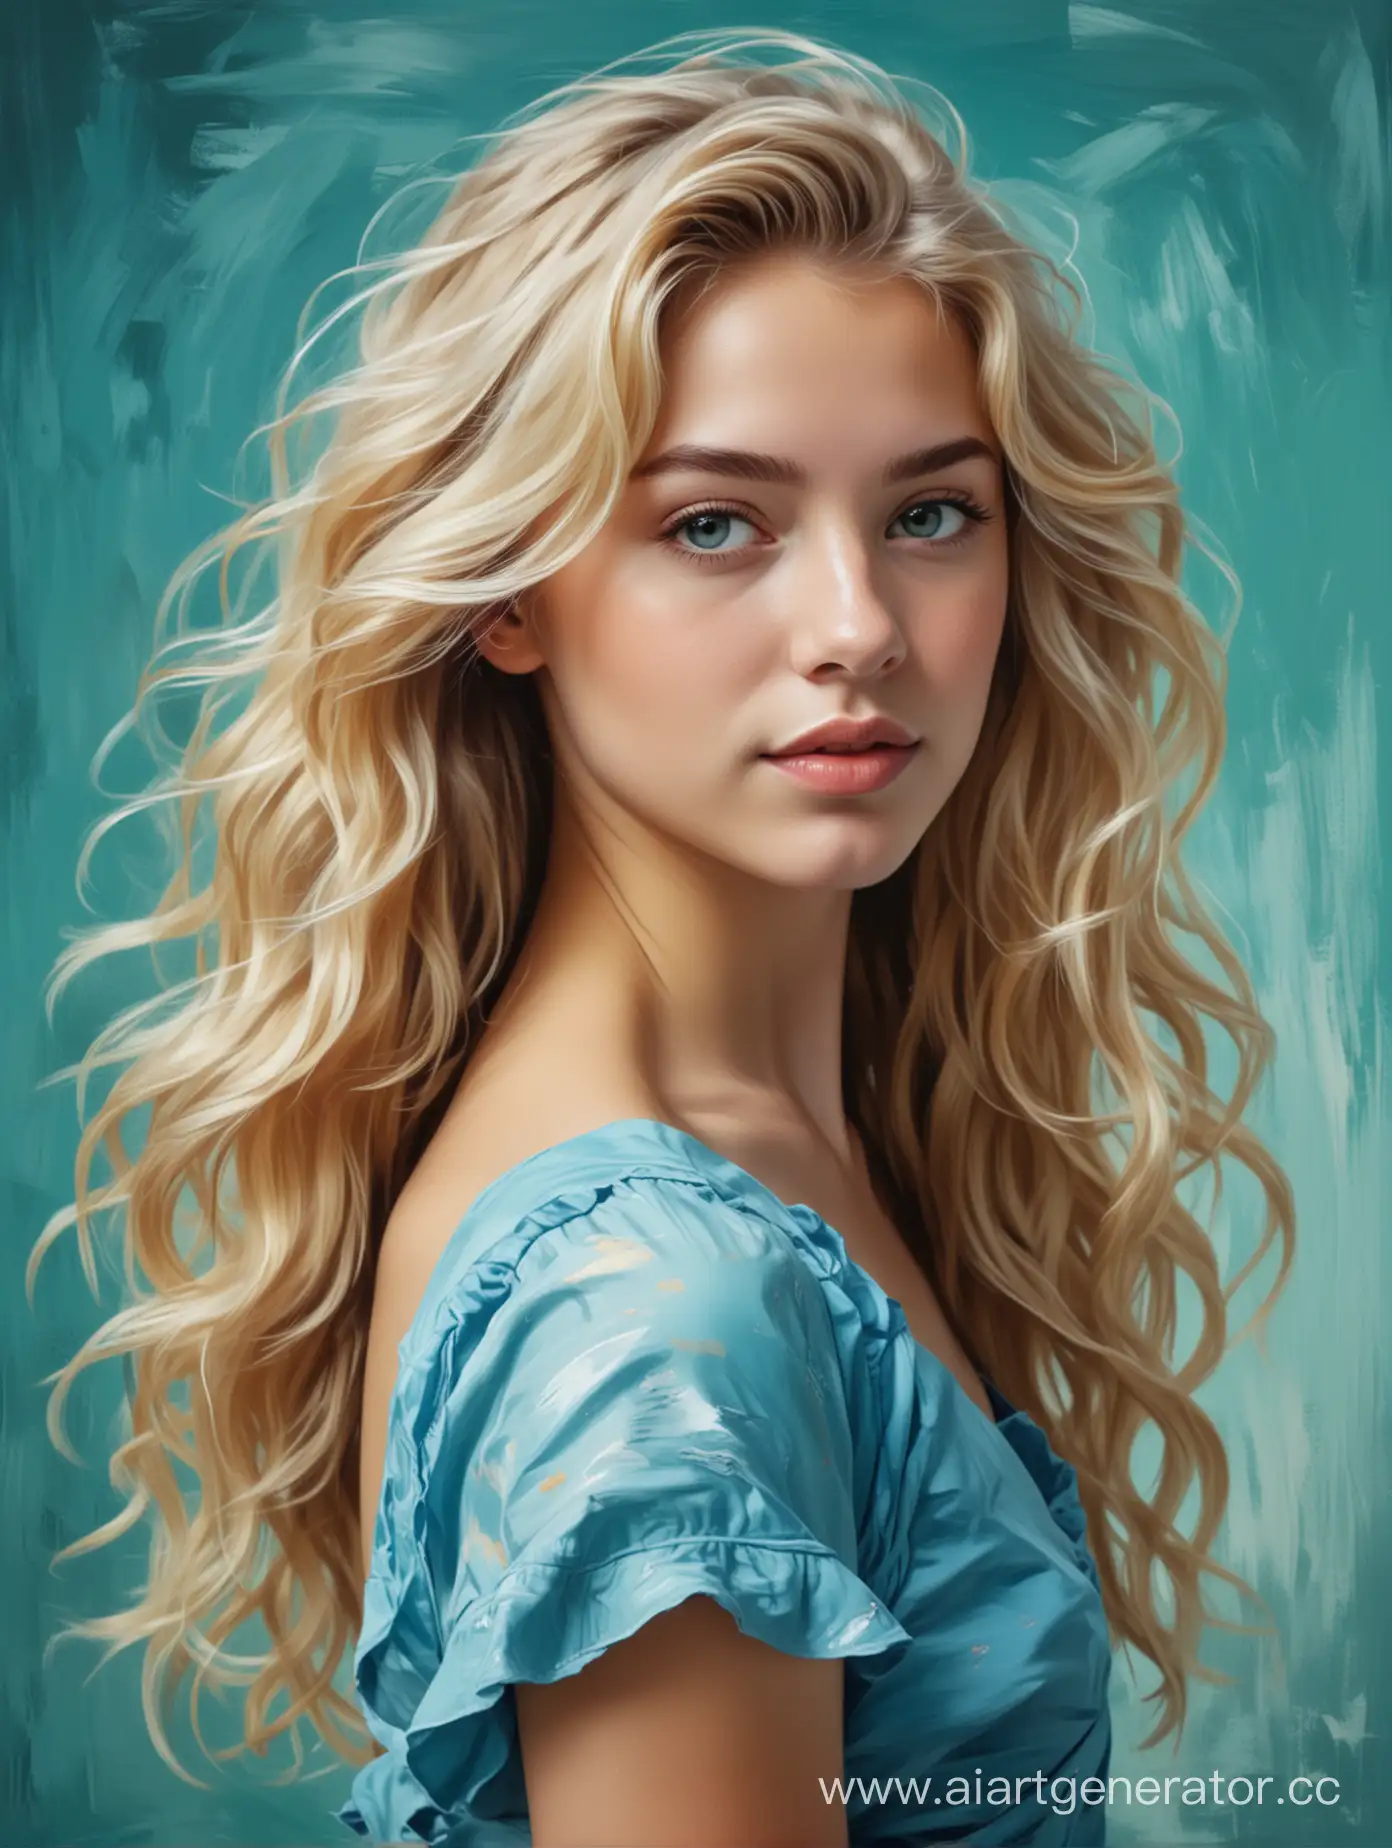 Portrait of a girl with blonde wavy hair in a blue dress background brushstrokes turquoise